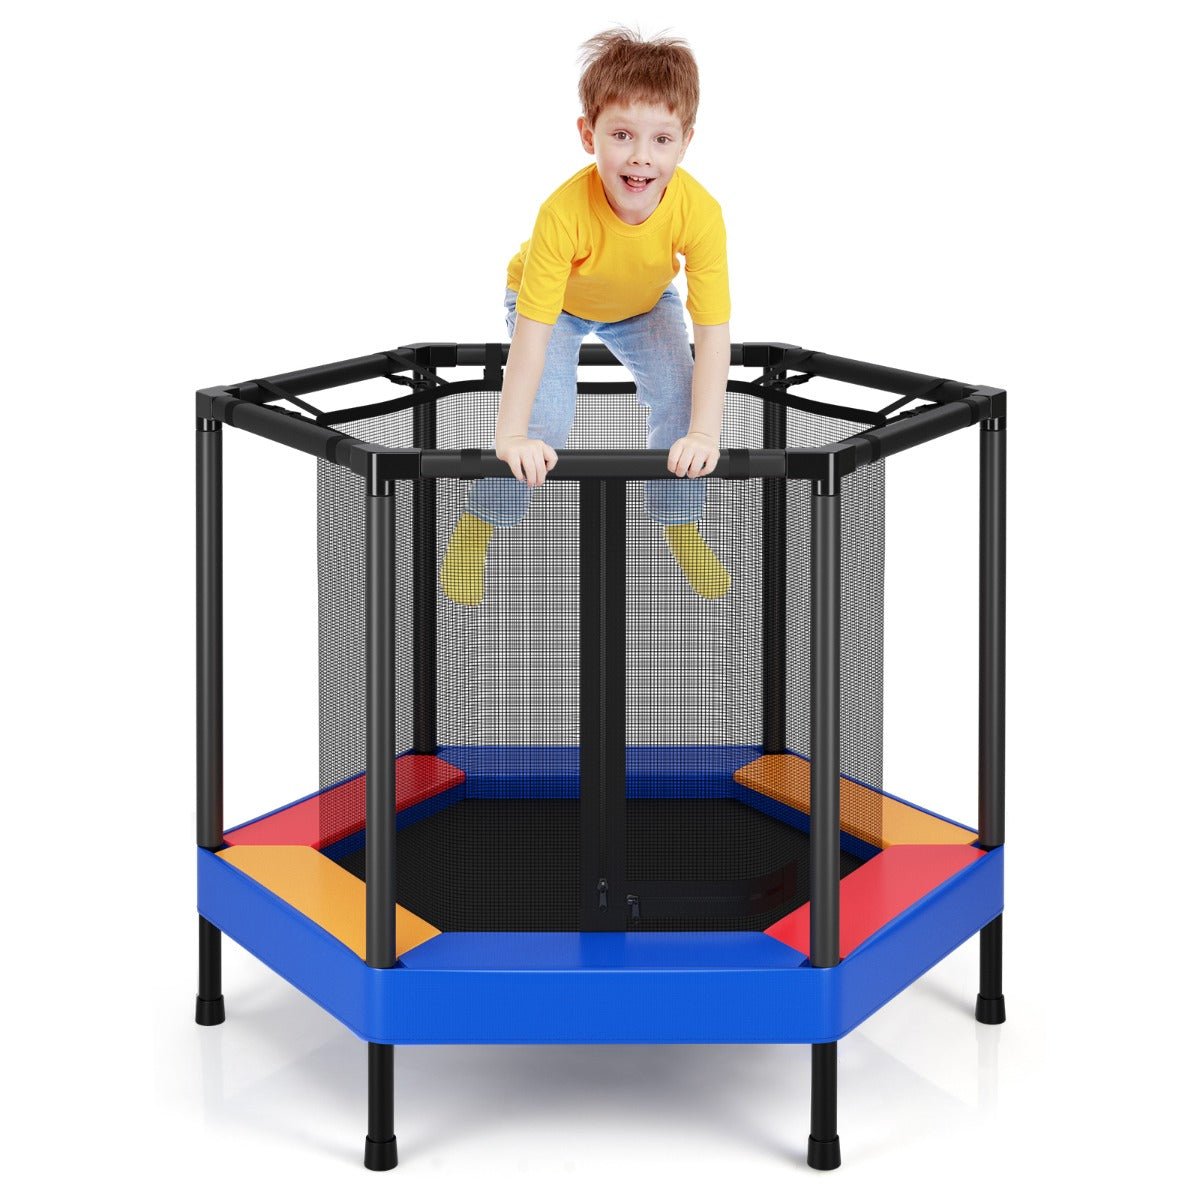 Adventure Awaits: 48 Inches Kids Trampoline with Safety Enclosure Net